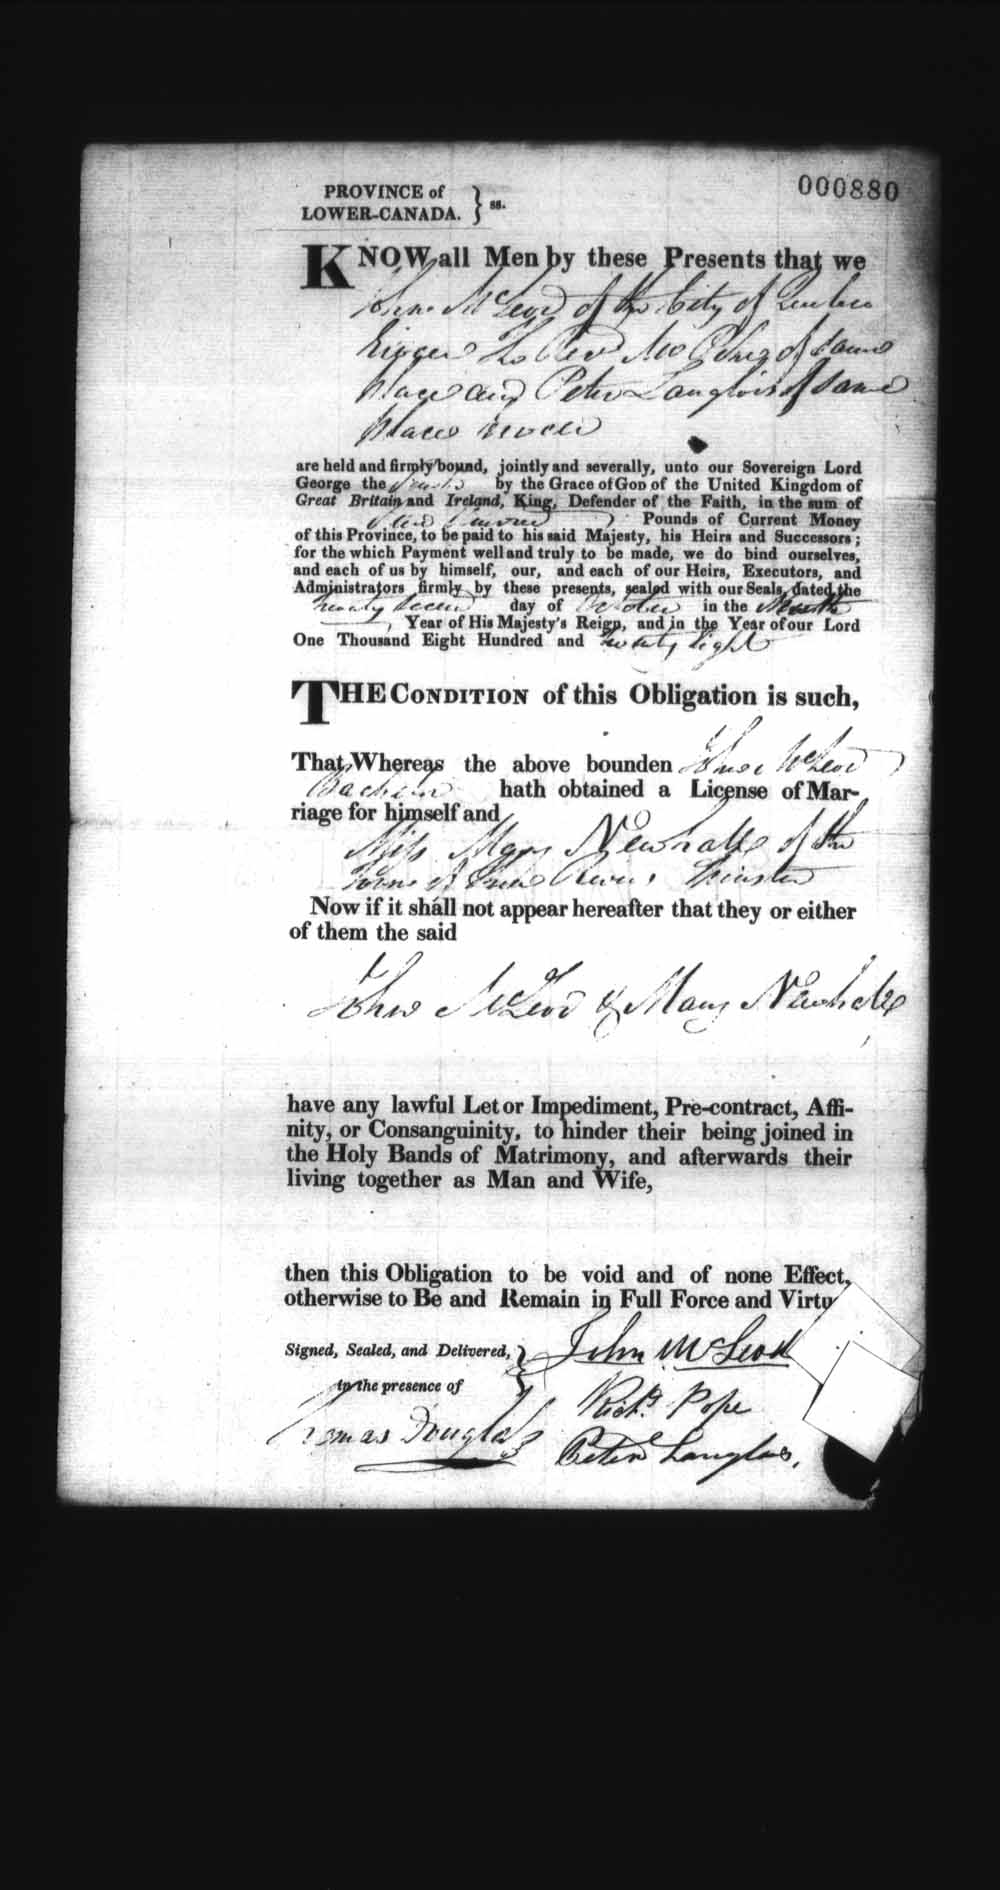 Digitized page of Upper and Lower Canada Marriage Bonds (1779-1865) for Image No.: e008236971